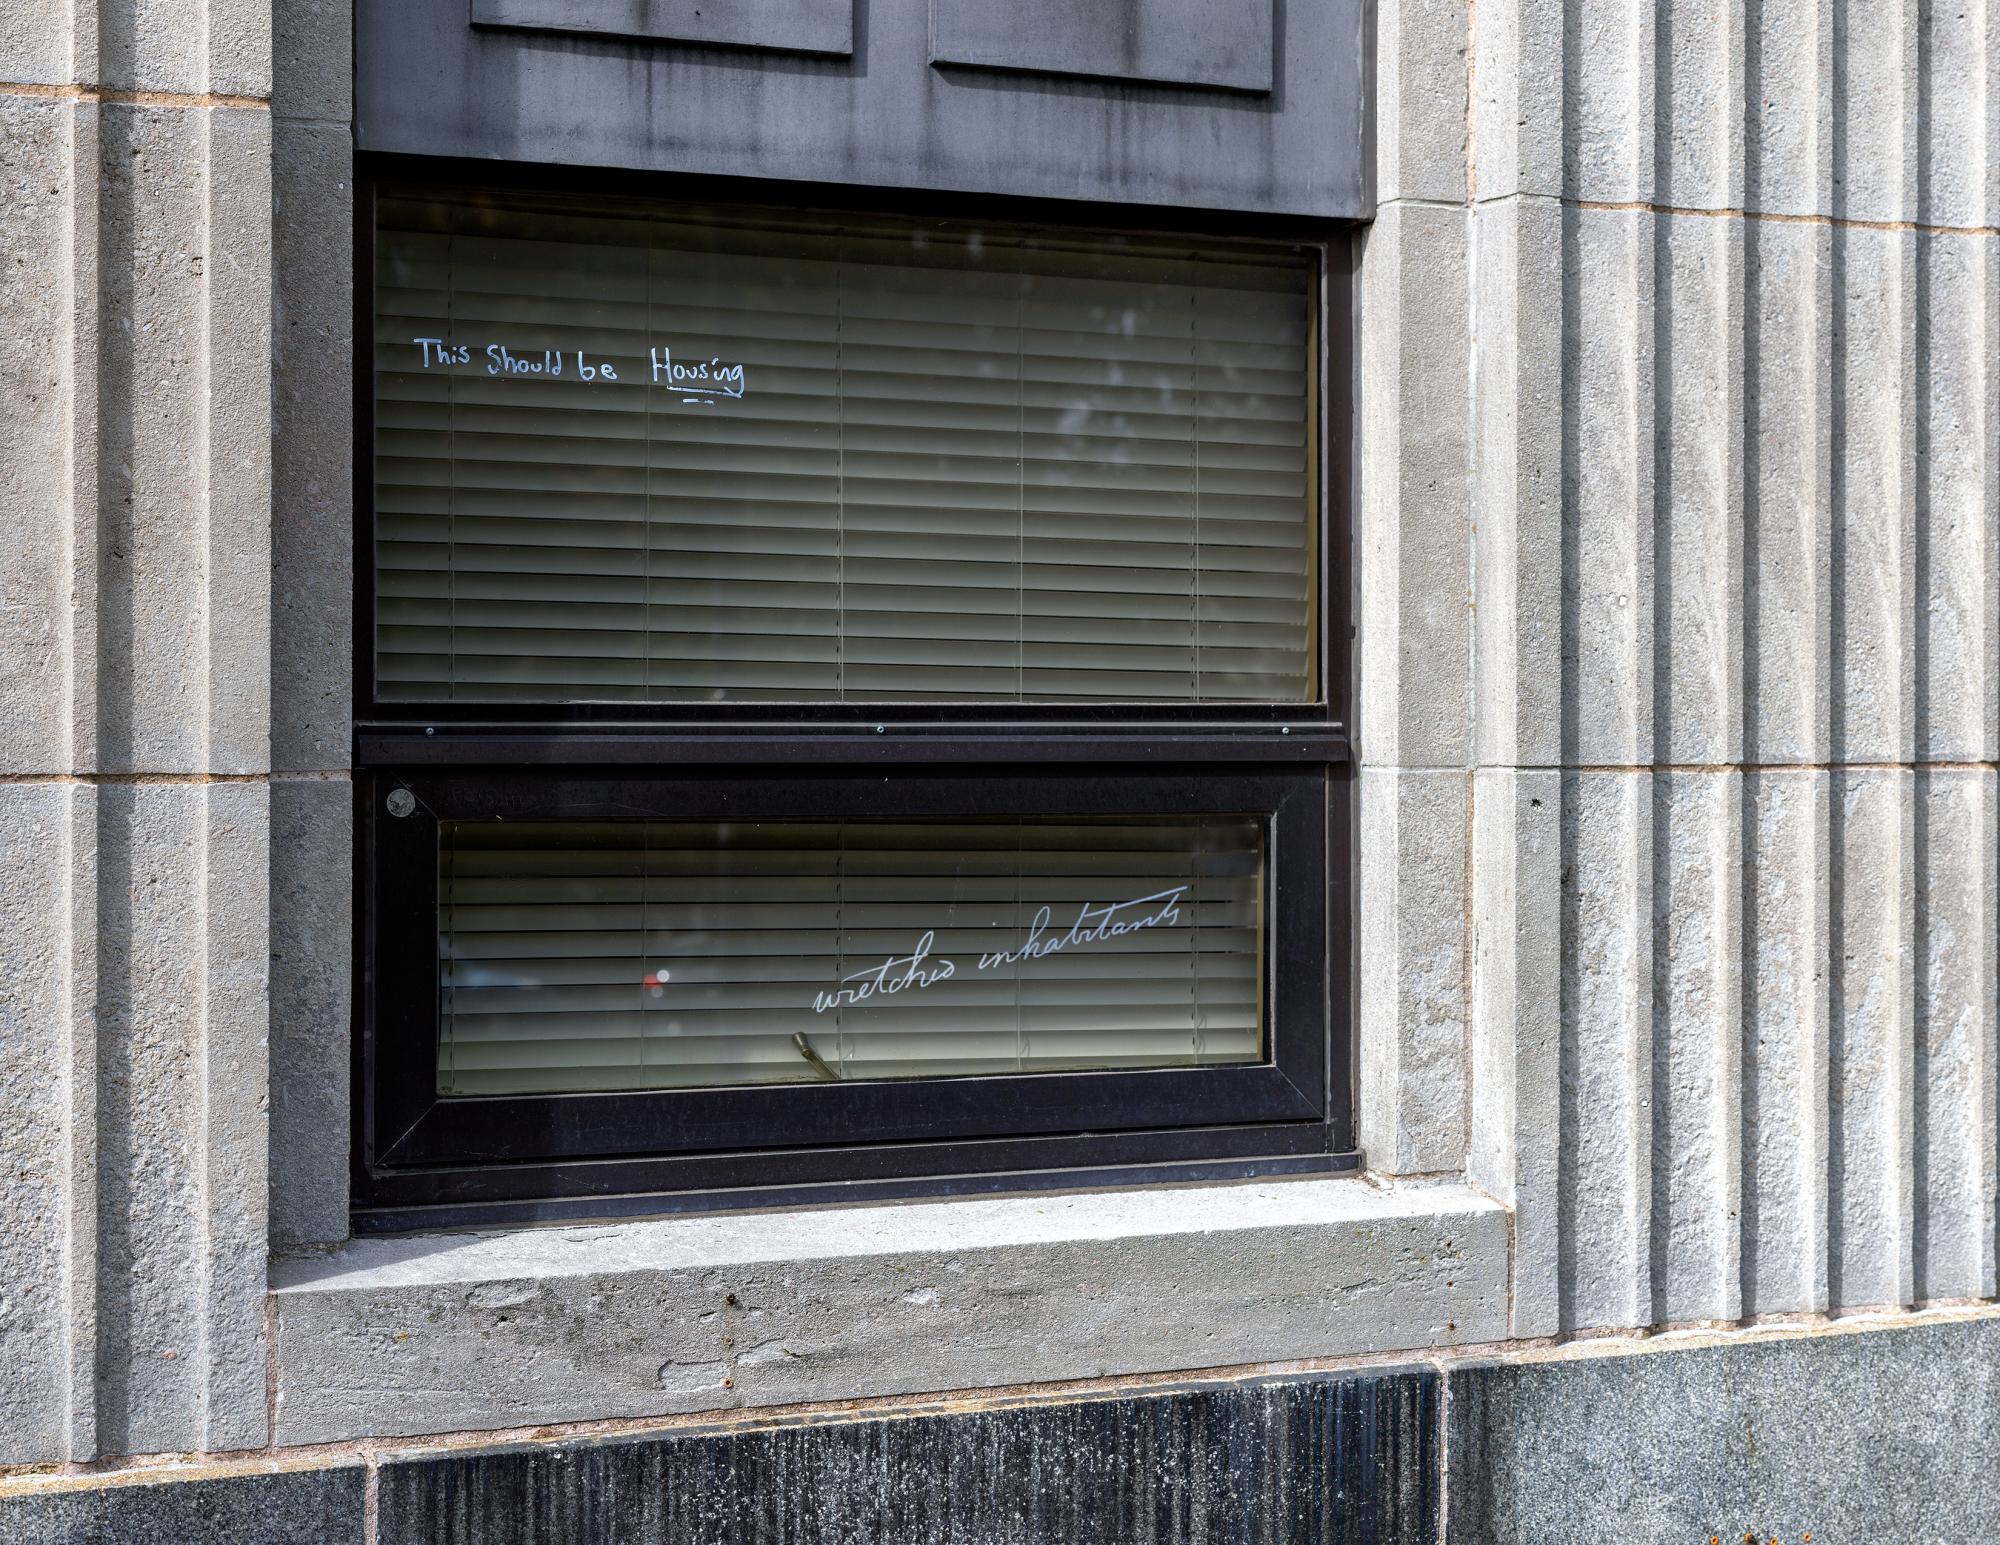 Windows of the old Halifax Memorial Library, writing on the windows read "this should be housing"